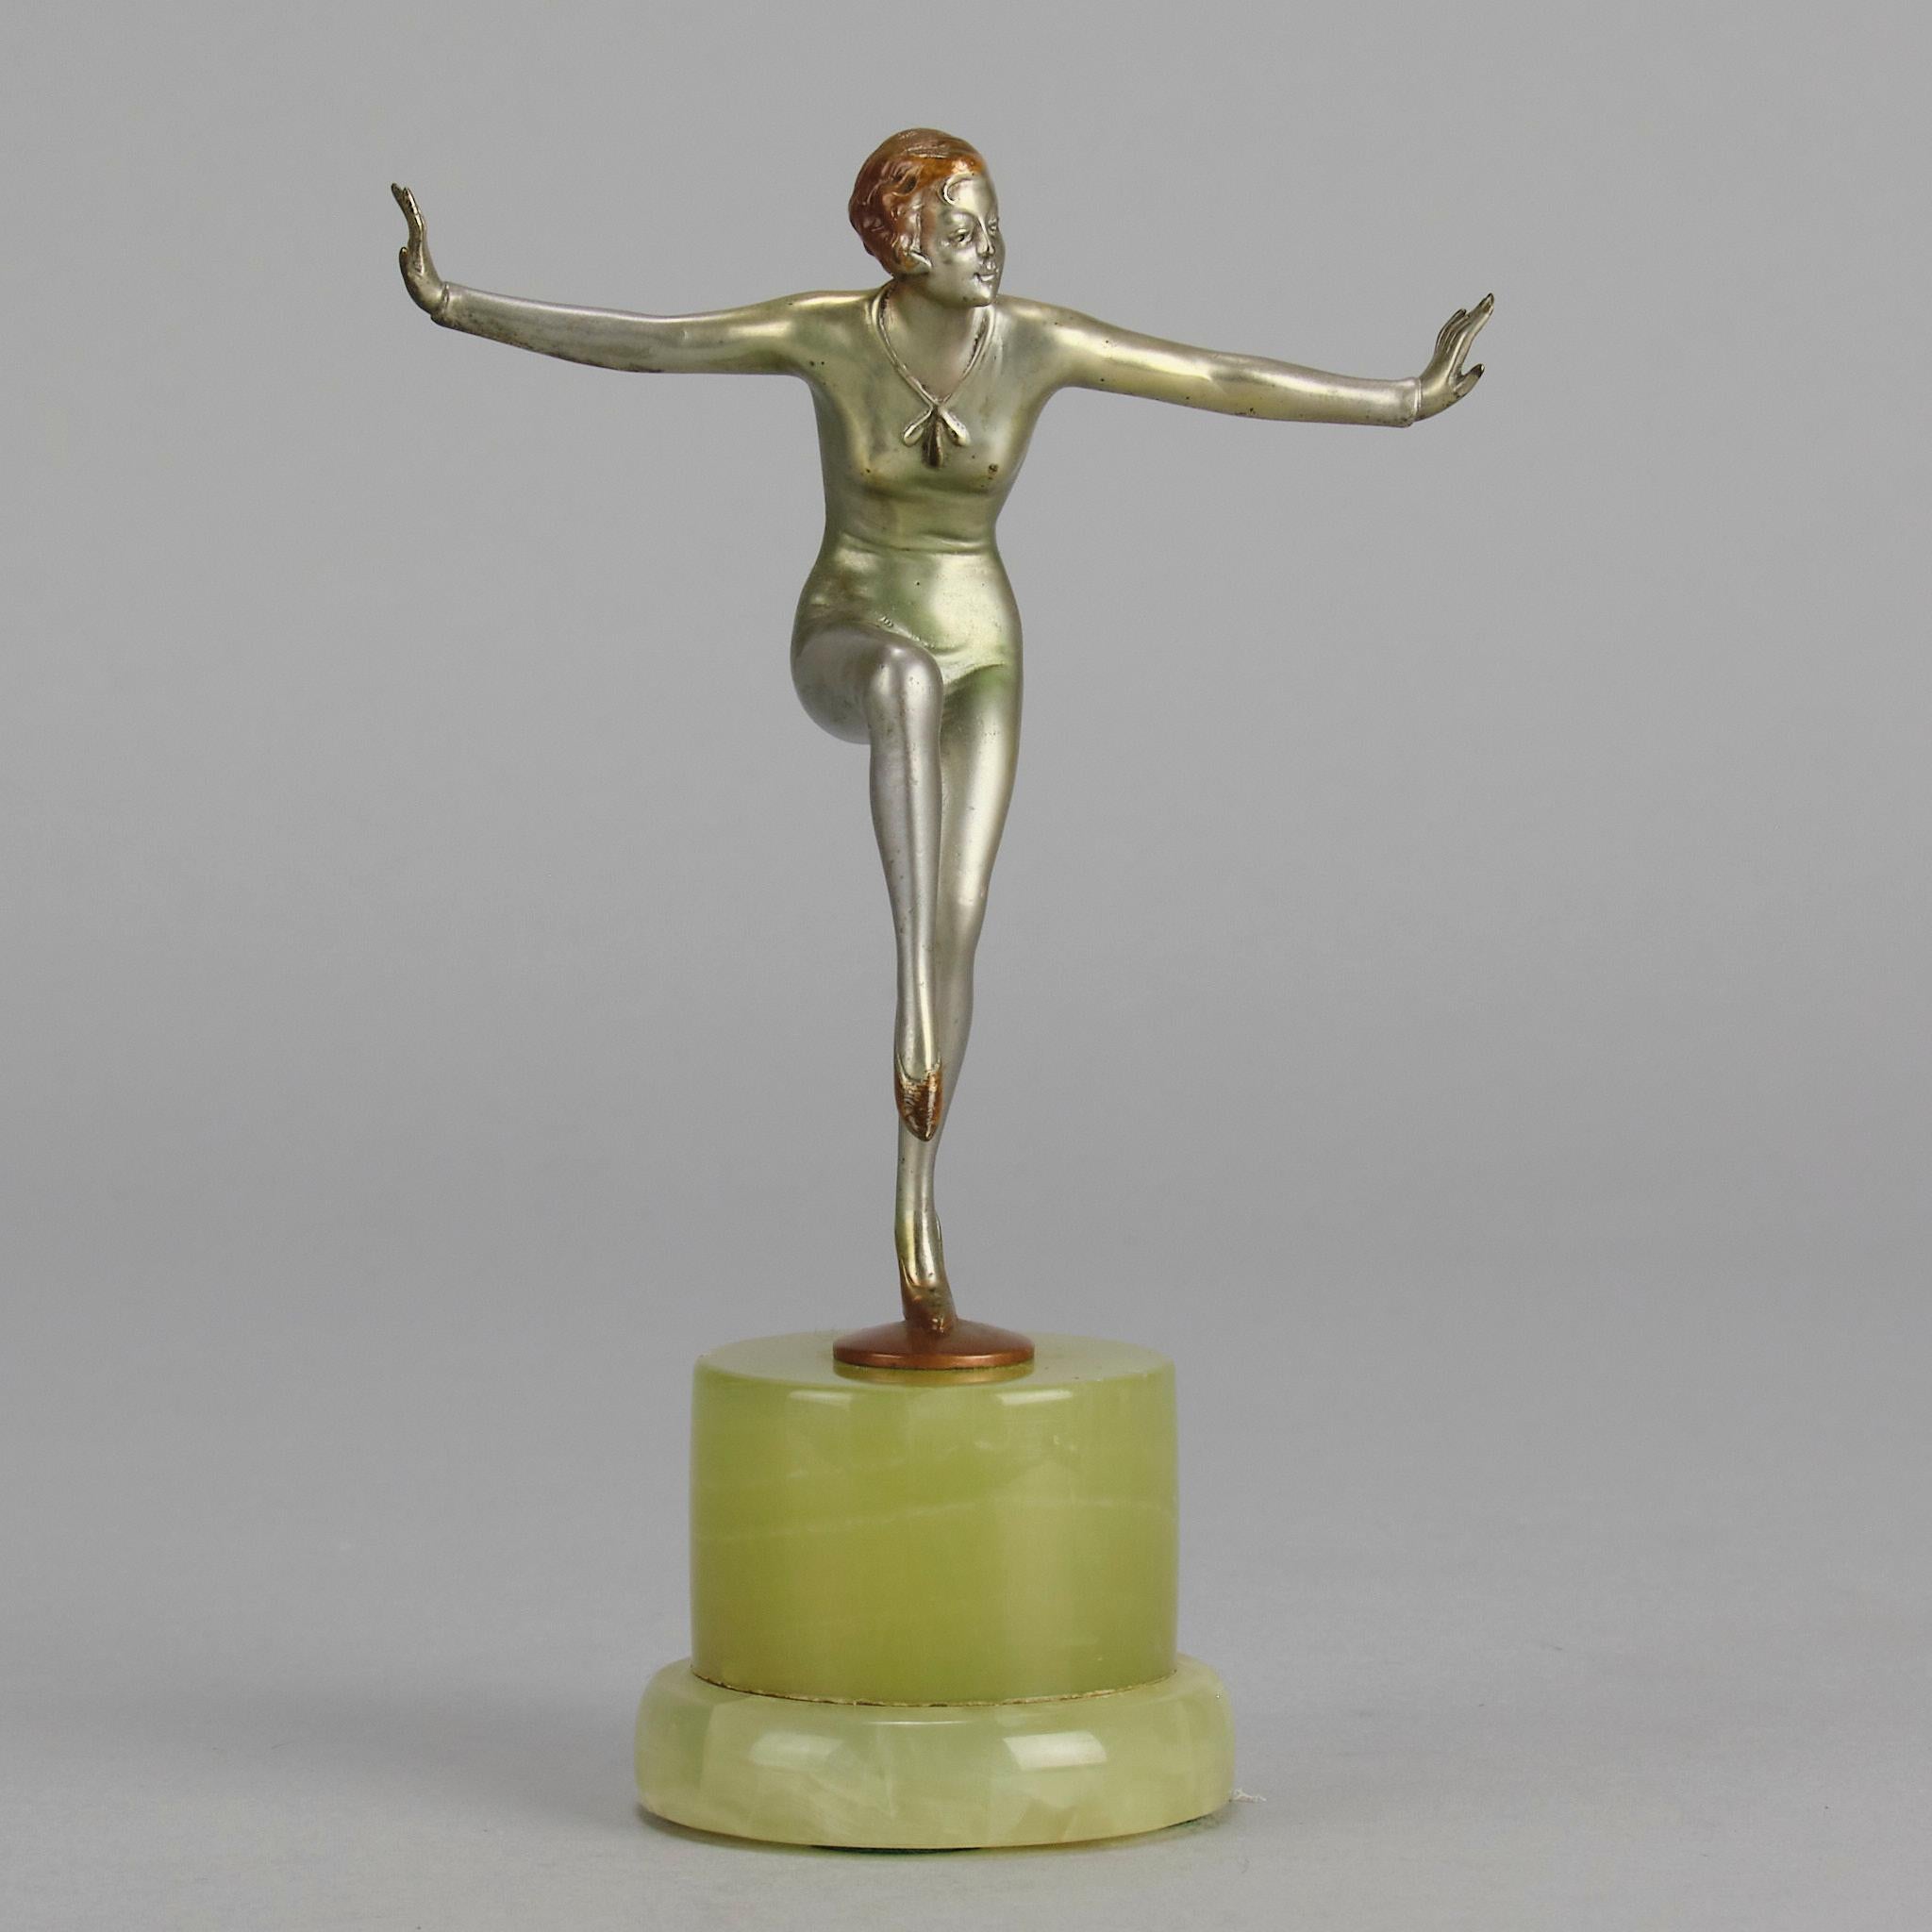 An impressive early 20th Century Art Deco cold painted giltand enamel bronze figure of a young energetic beauty in a balanced dancing pose with a scarf draped around her midriff. The bronze exhibiting excellent colour and very fine hand chased